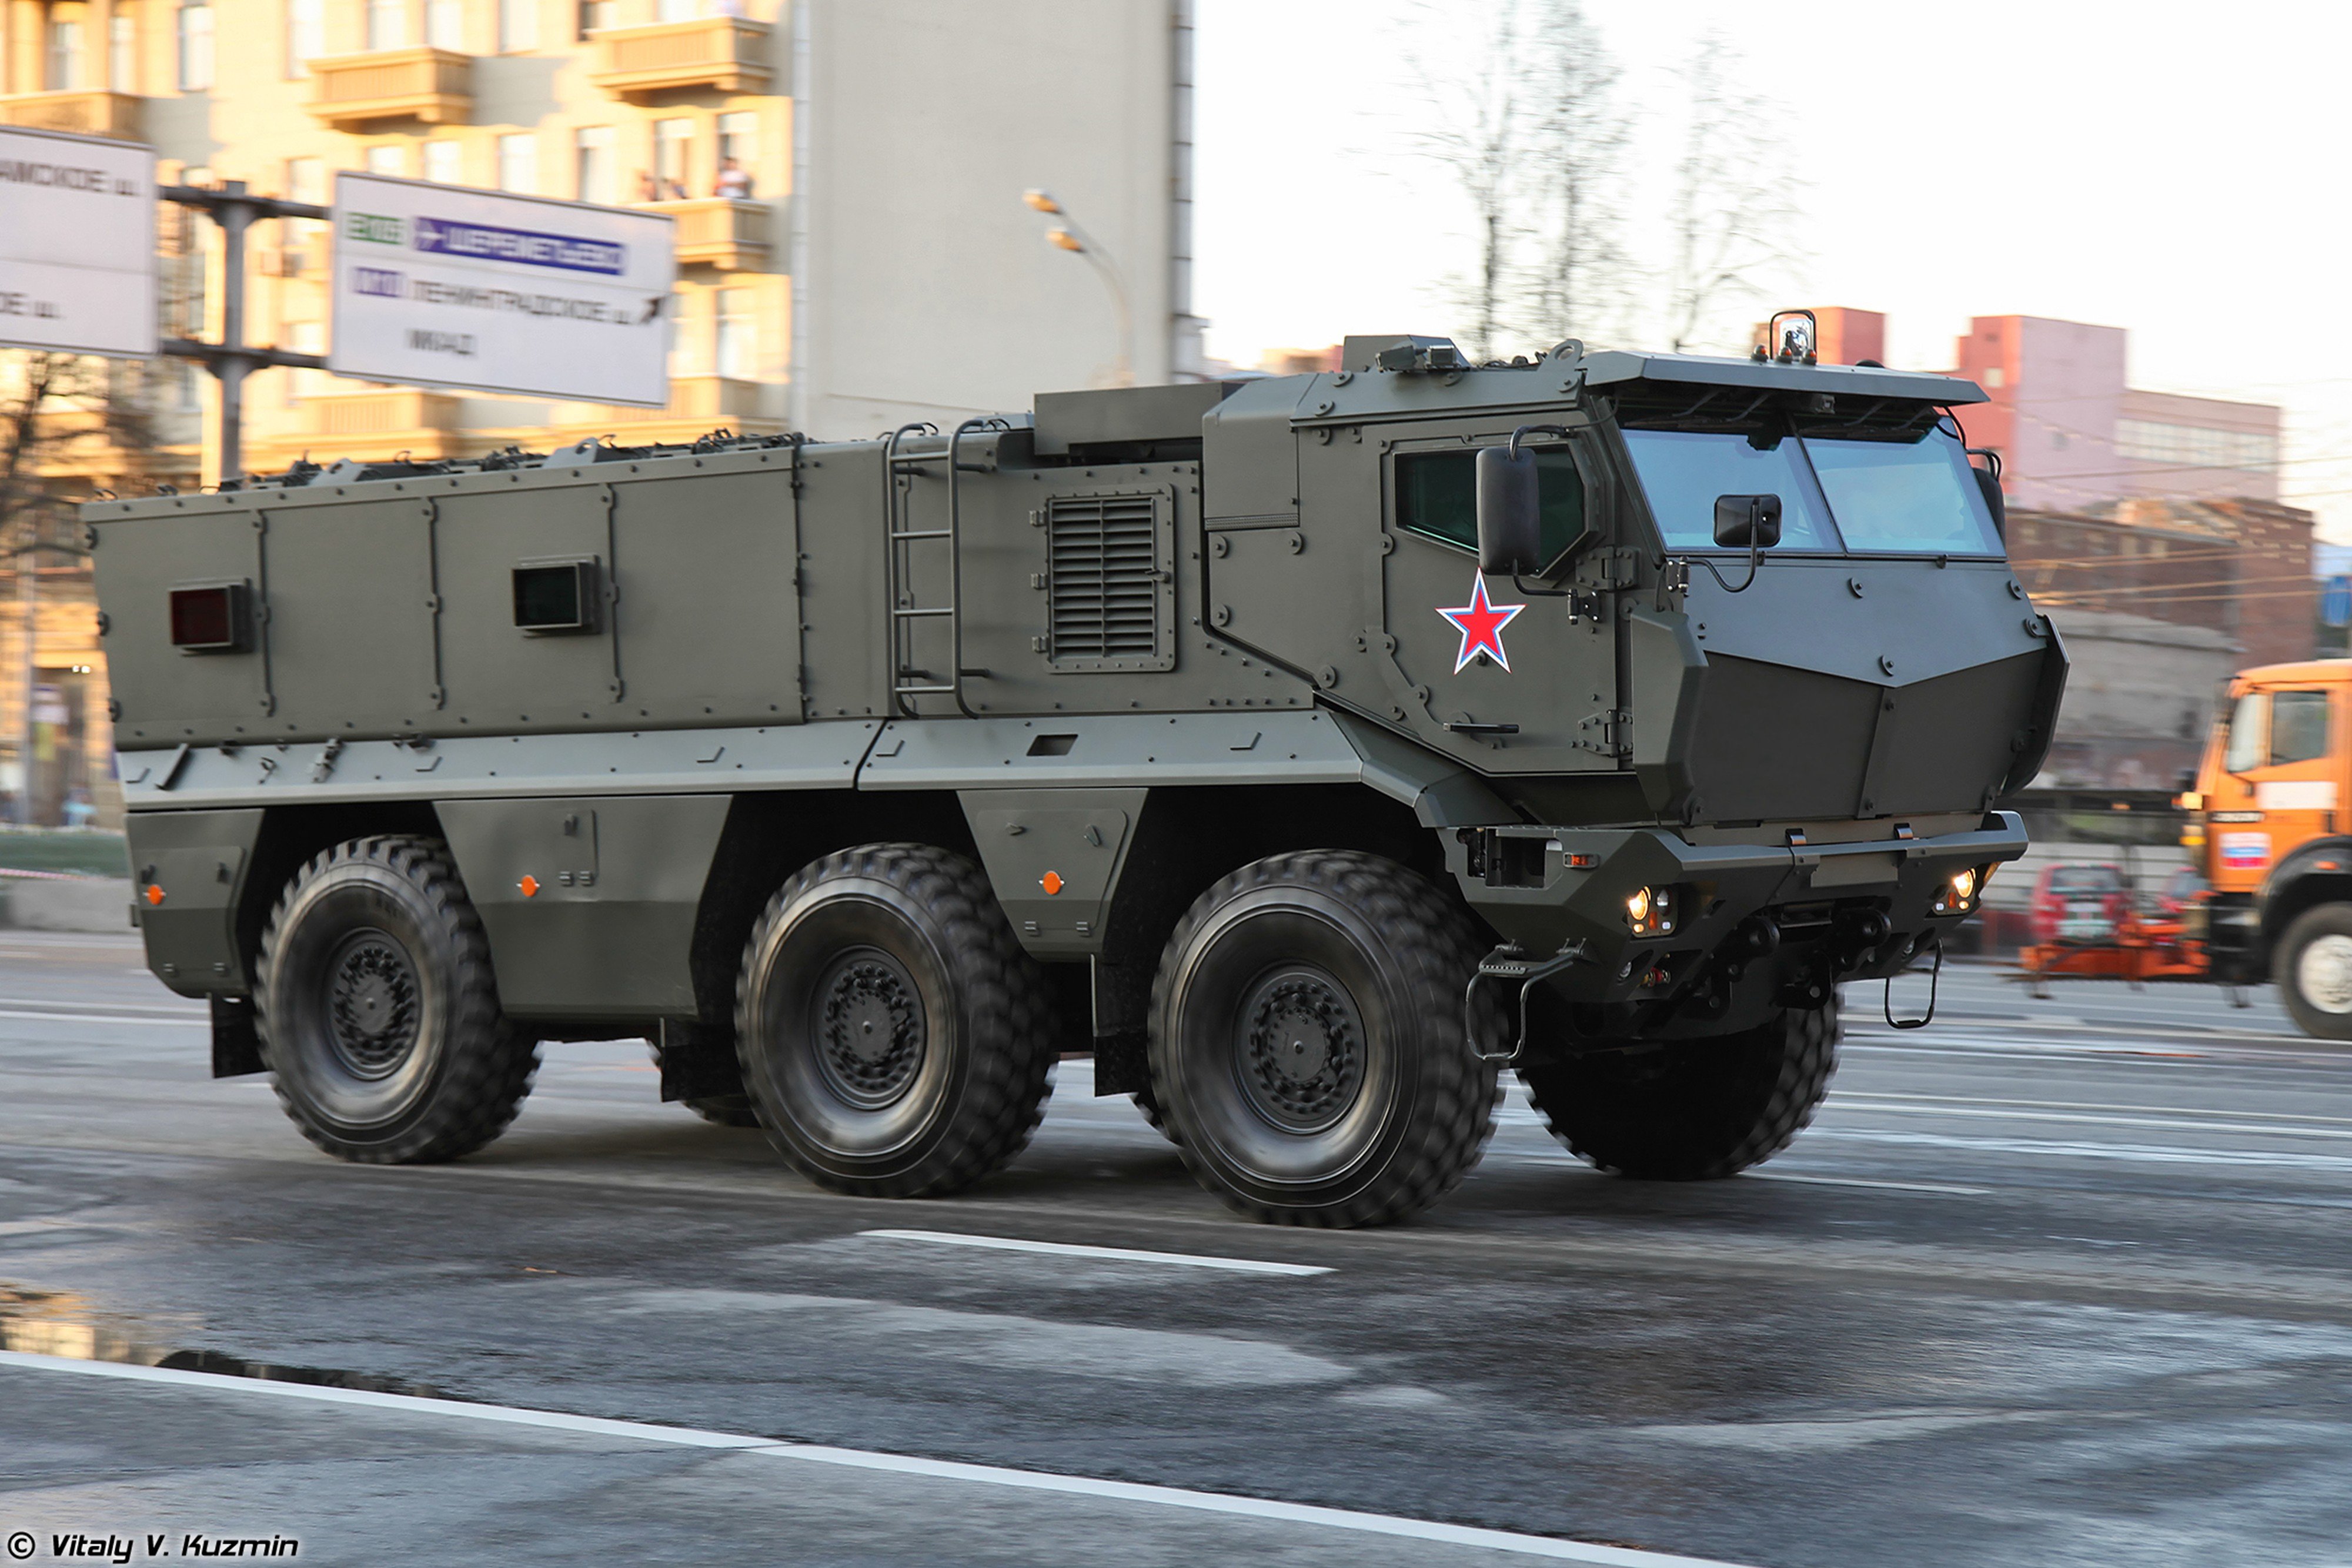 april 29th, Rehearsal, Of, 2014, Victory, Day, Parade, In, Moscow, Russia, Red, Star, Russian, Military, Army, Kamaz 63968, Typhoon k, Mrap, Vehicle, 2, 4000x2667 Wallpaper